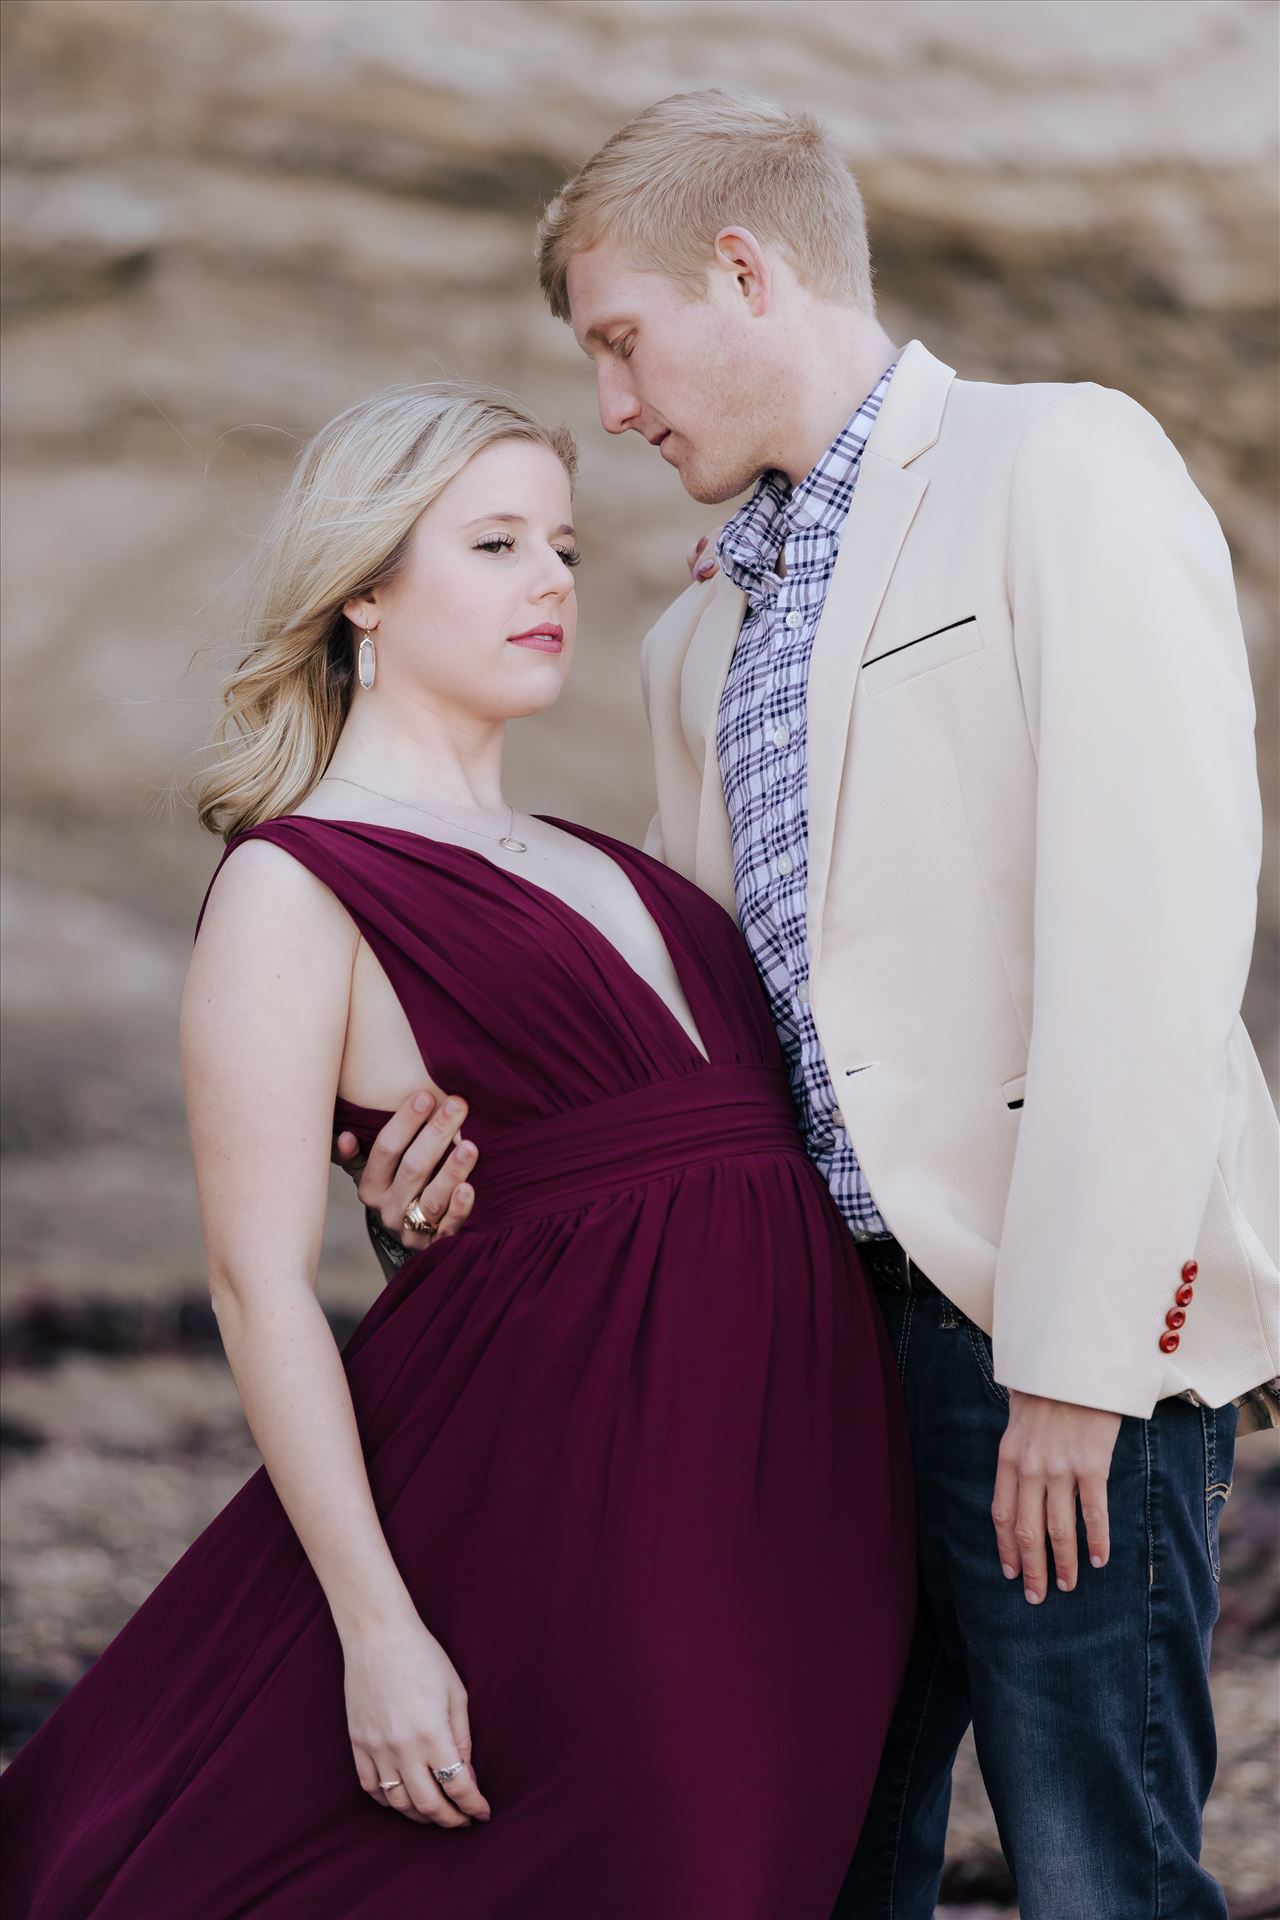 _Y9A7488.JPG San Luis Obispo and Santa Barbara County Wedding and Engagement Photography. Mirror's Edge Photography captures Montana de Oro Engagement Session.  Romantic couple on the beach. by Sarah Williams